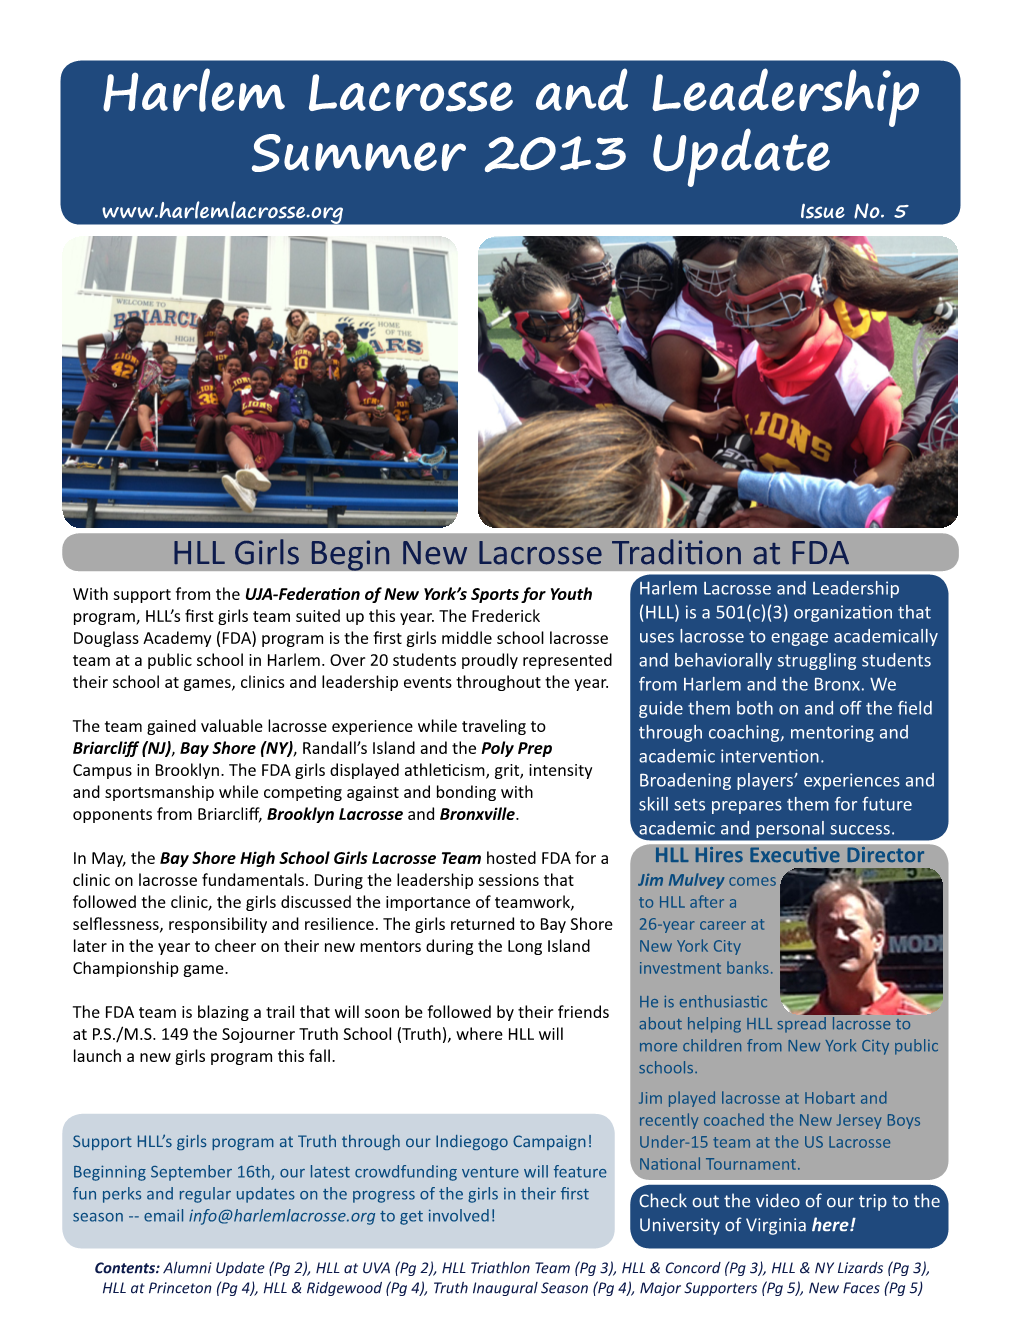 Harlem Lacrosse and Leadership Summer 2013 Update Issue No